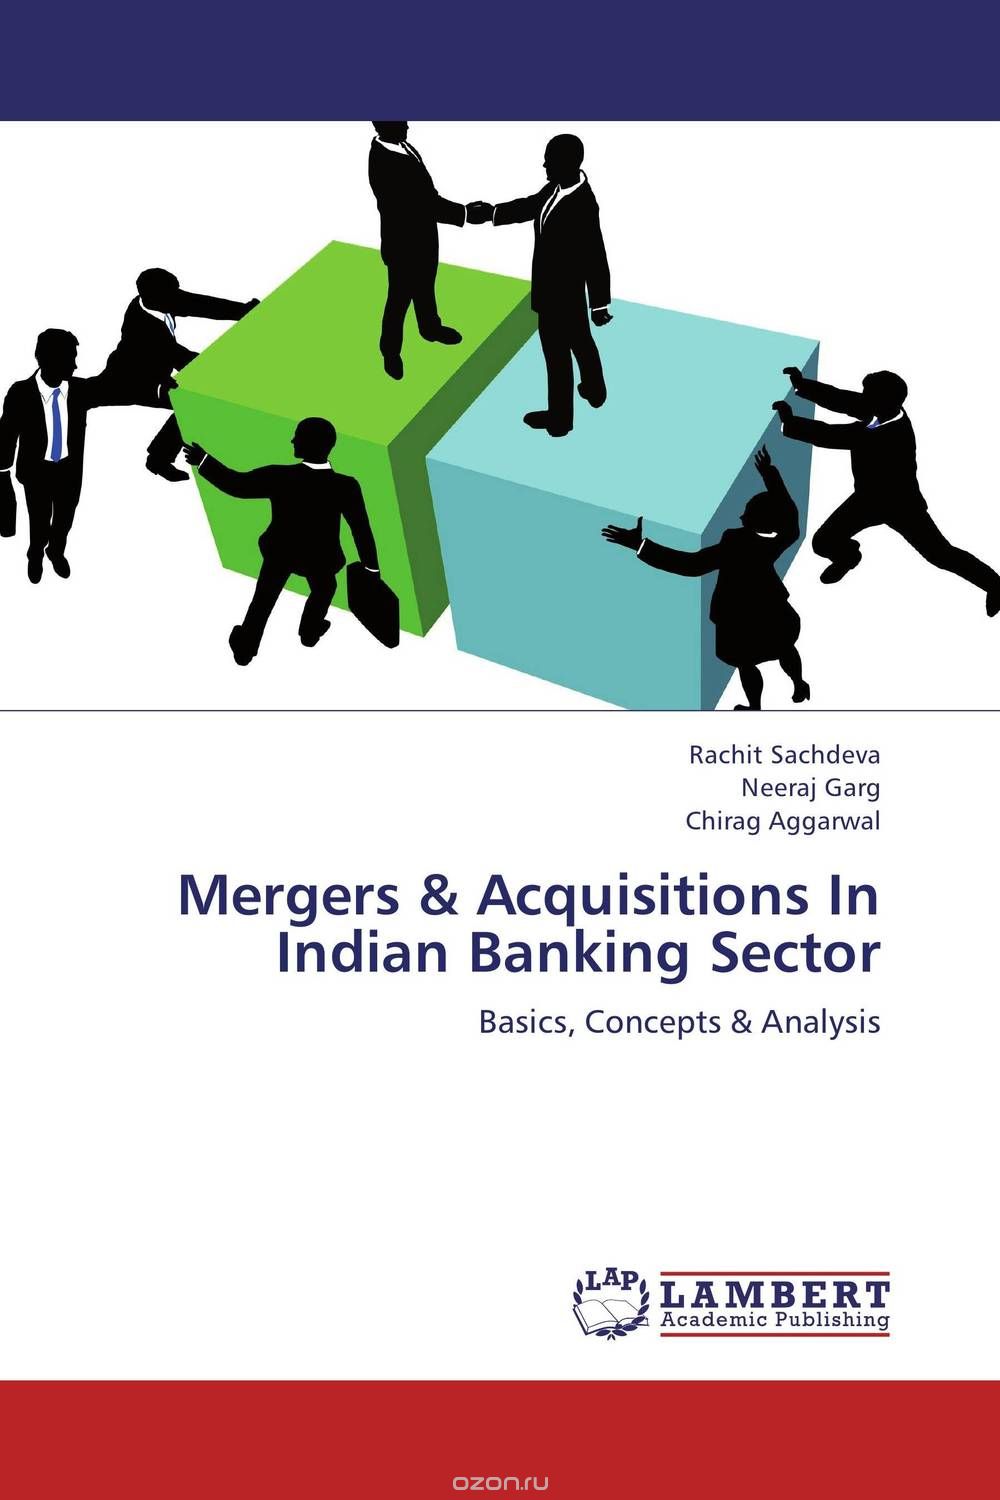 Mergers & Acquisitions In Indian Banking Sector